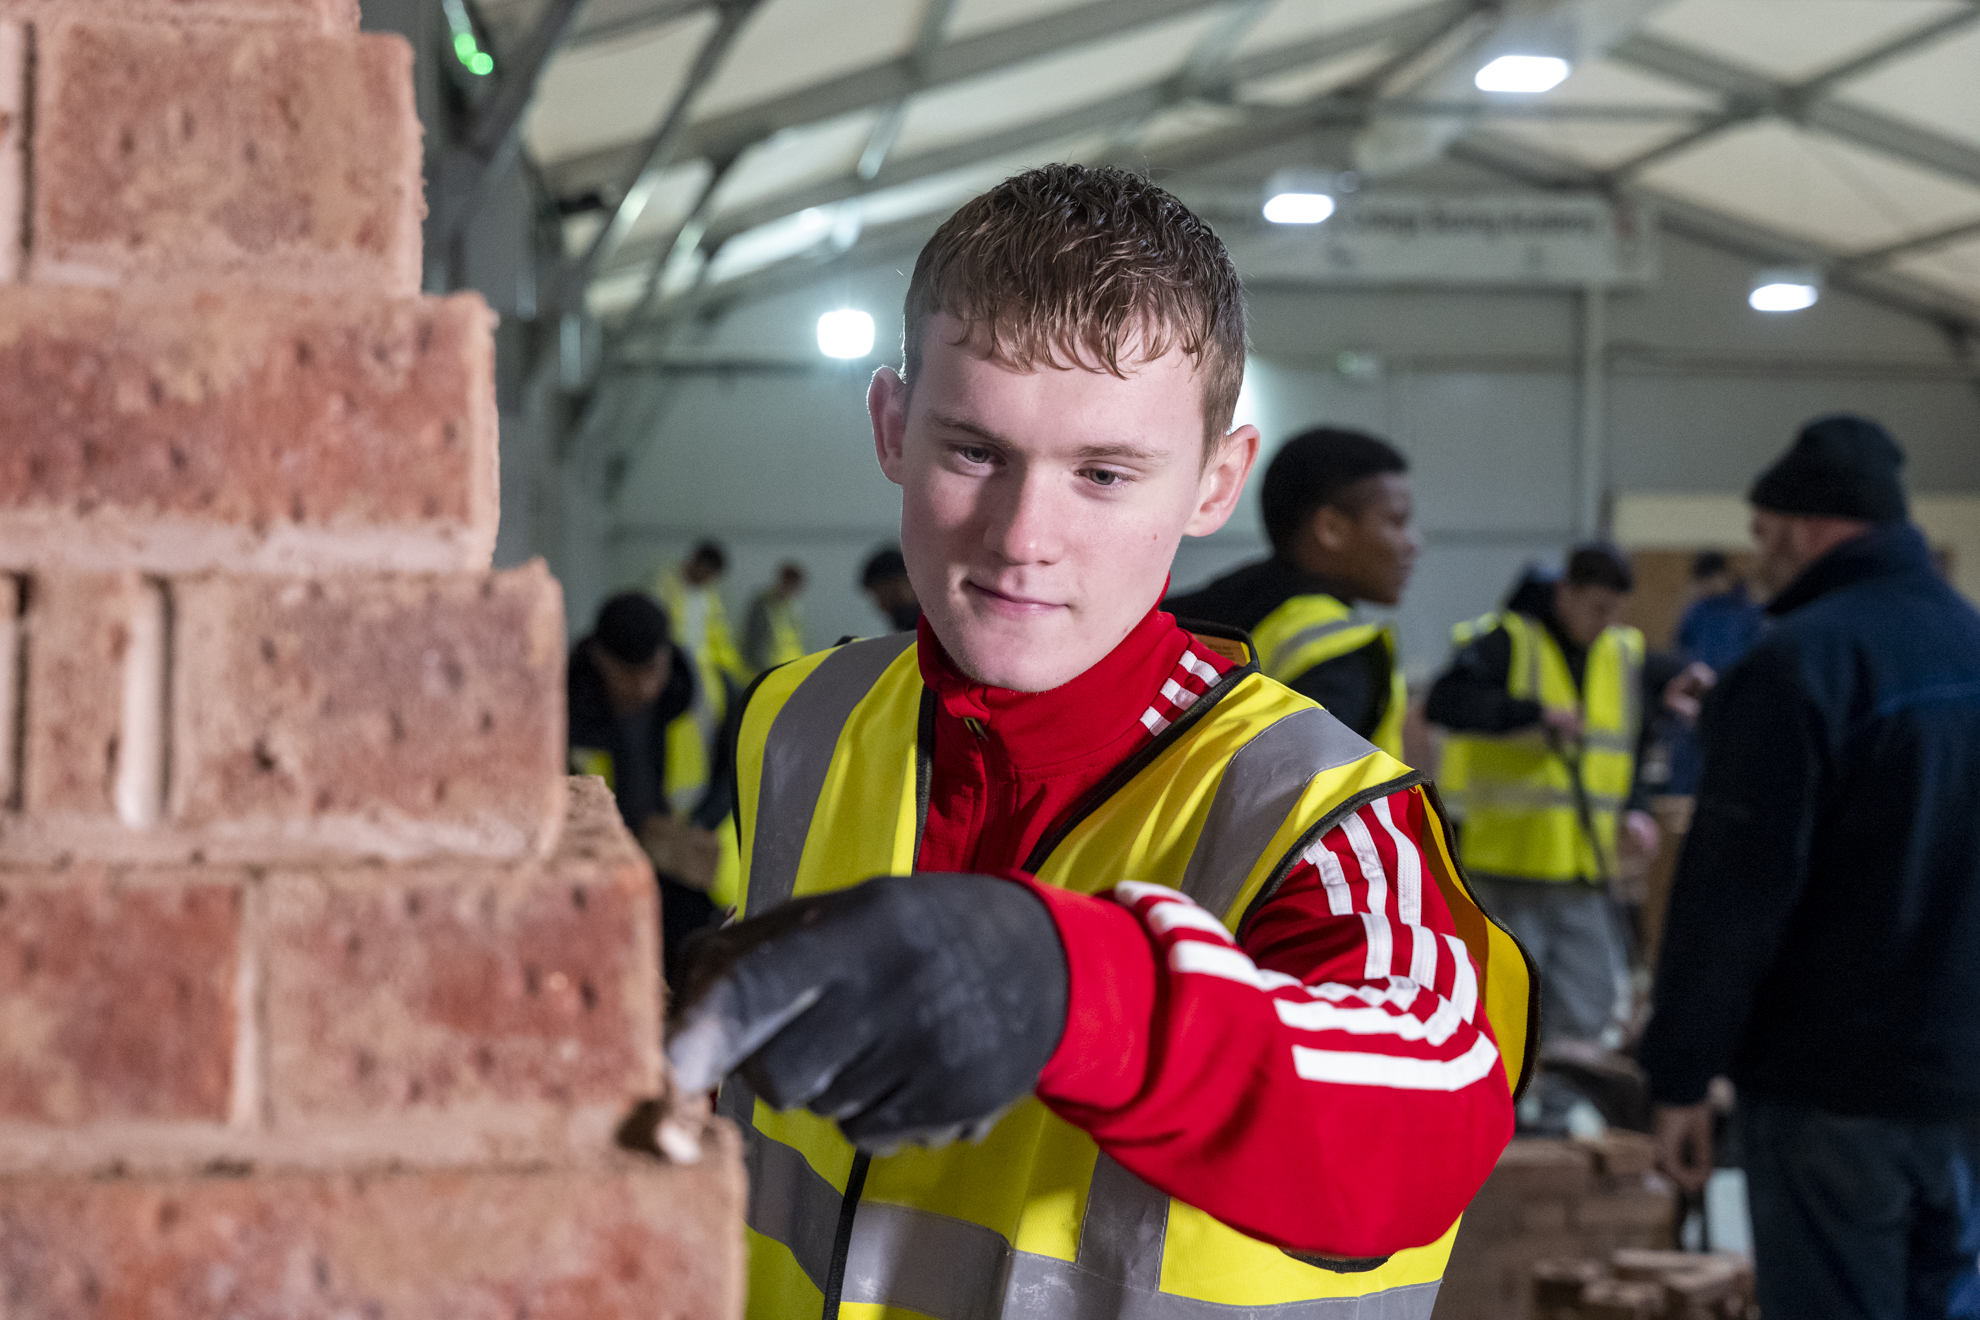 Technical Certificate in Bricklaying